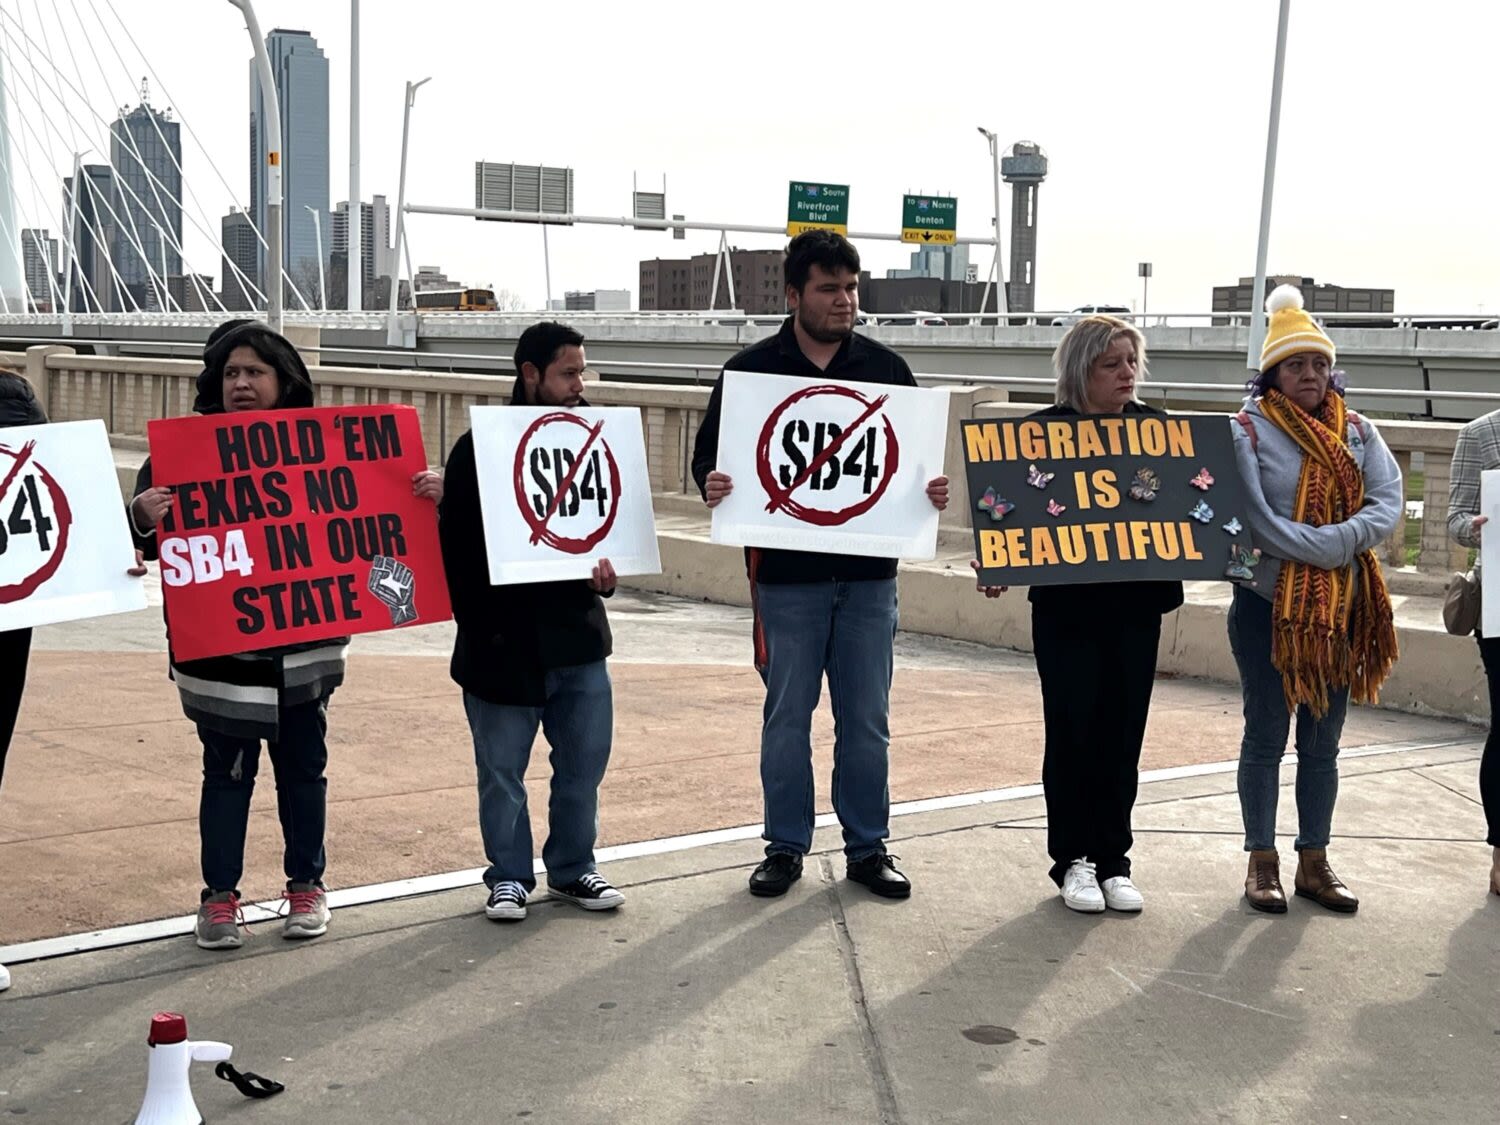 Some Houstonians ask Mayor Whitmire to set local standards for Houston Police ahead of controversial Texas immigration law | Houston Public Media